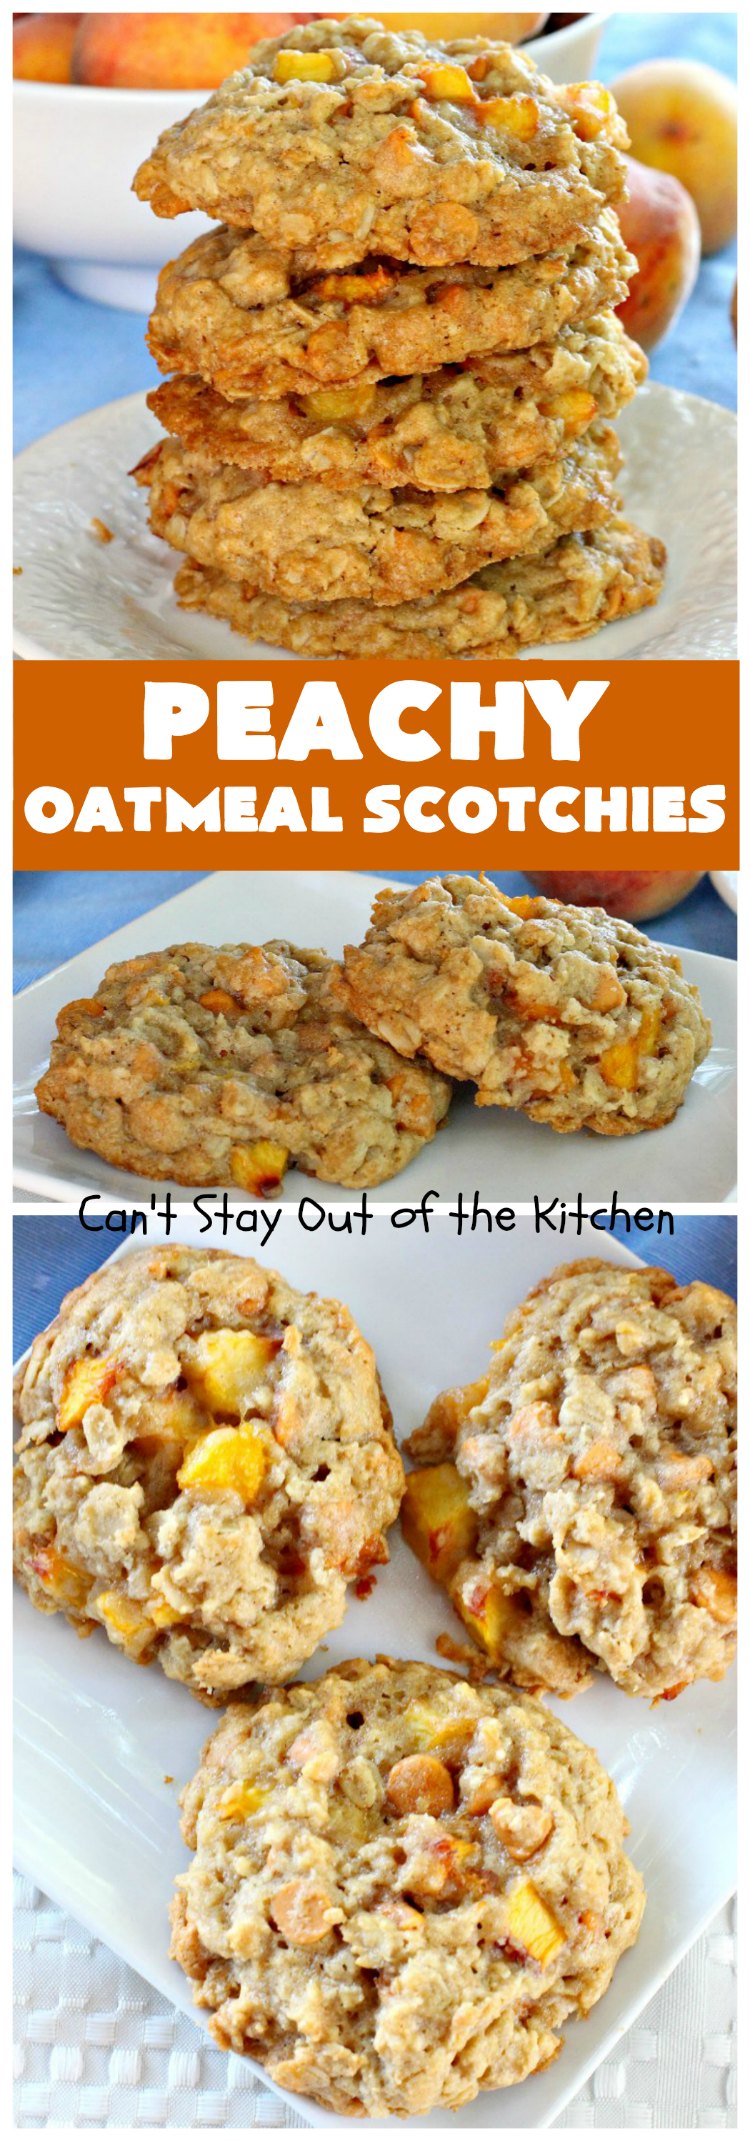 Peachy Oatmeal Scotchies | Can't Stay Out of the Kitchen